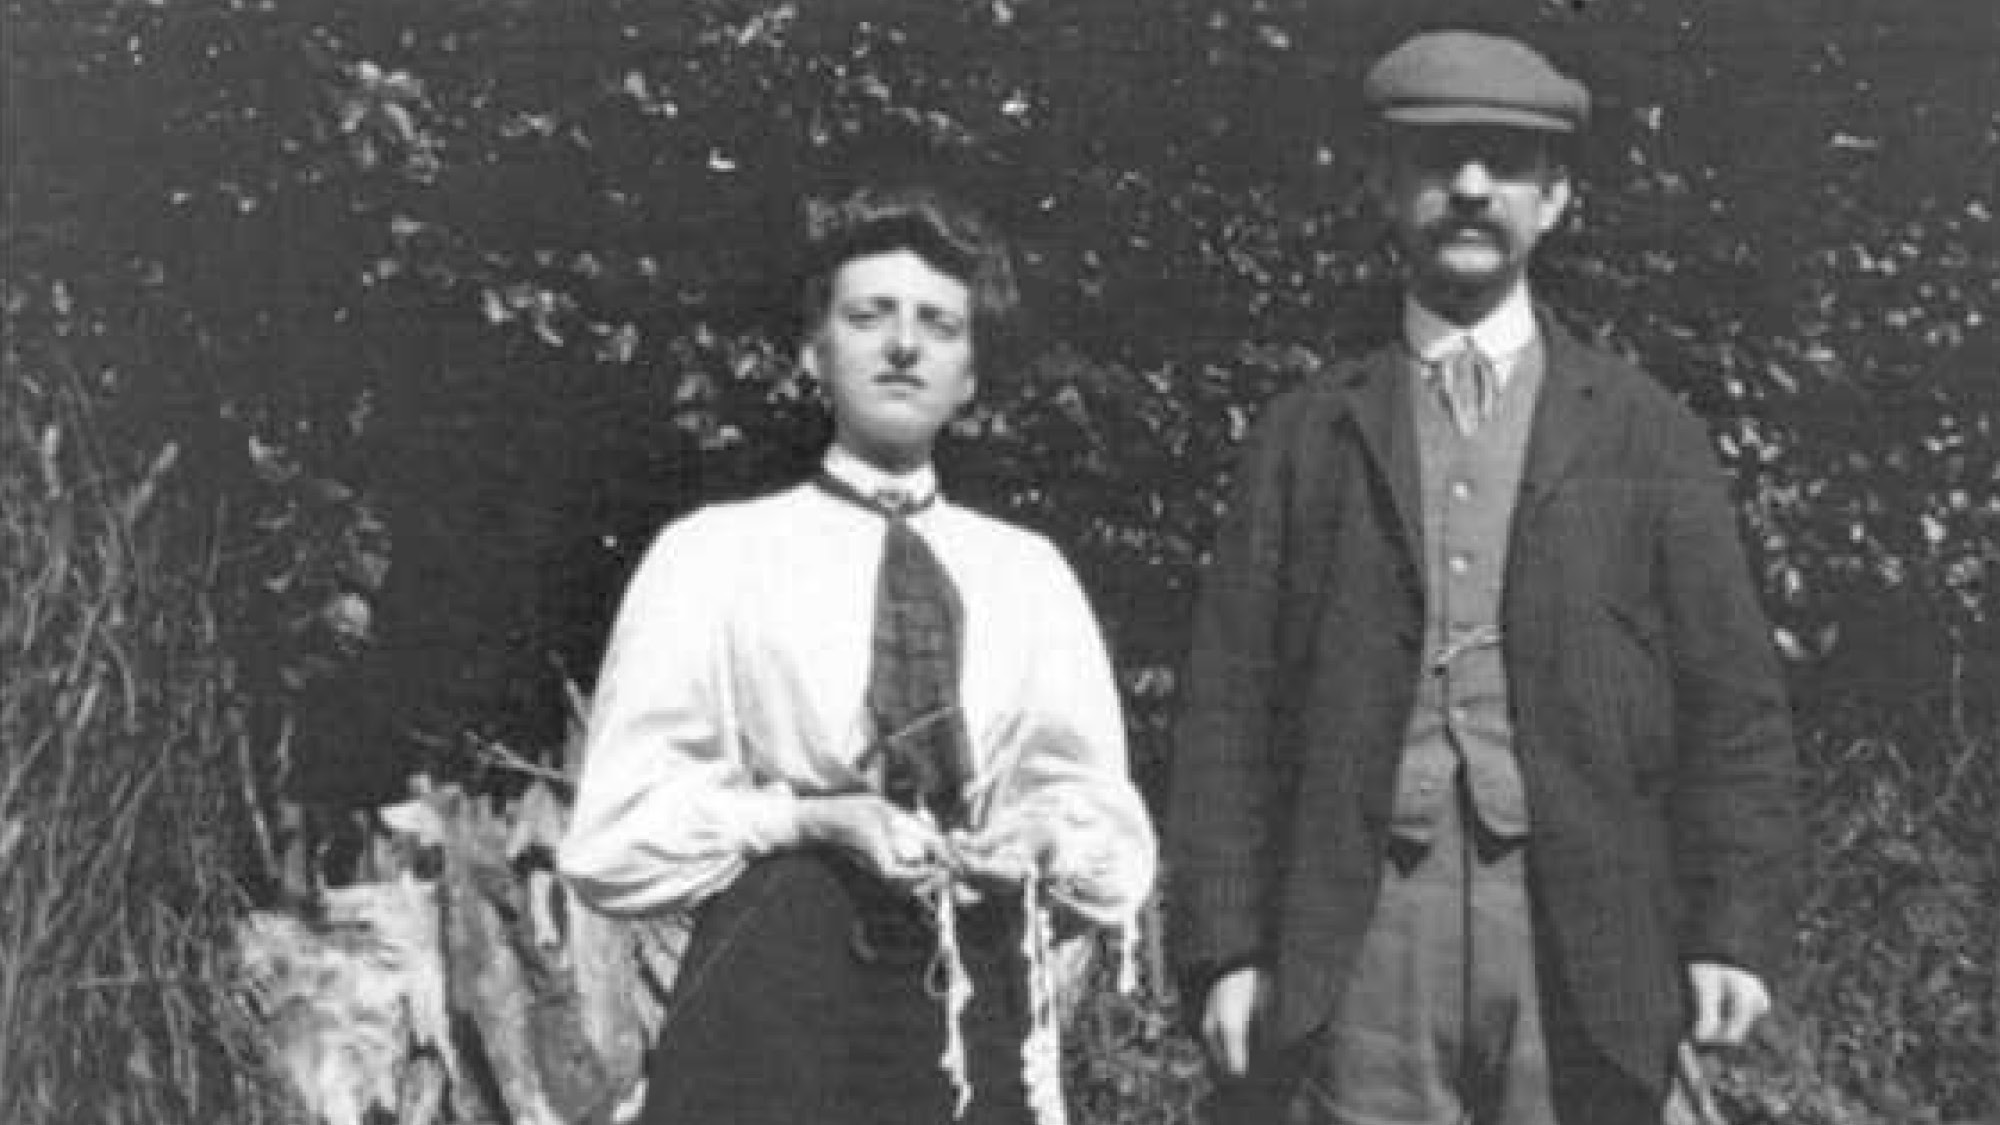 Historical photo of the Parish family: woman and man dressed formally, facing the camera, in rural outdoor setting